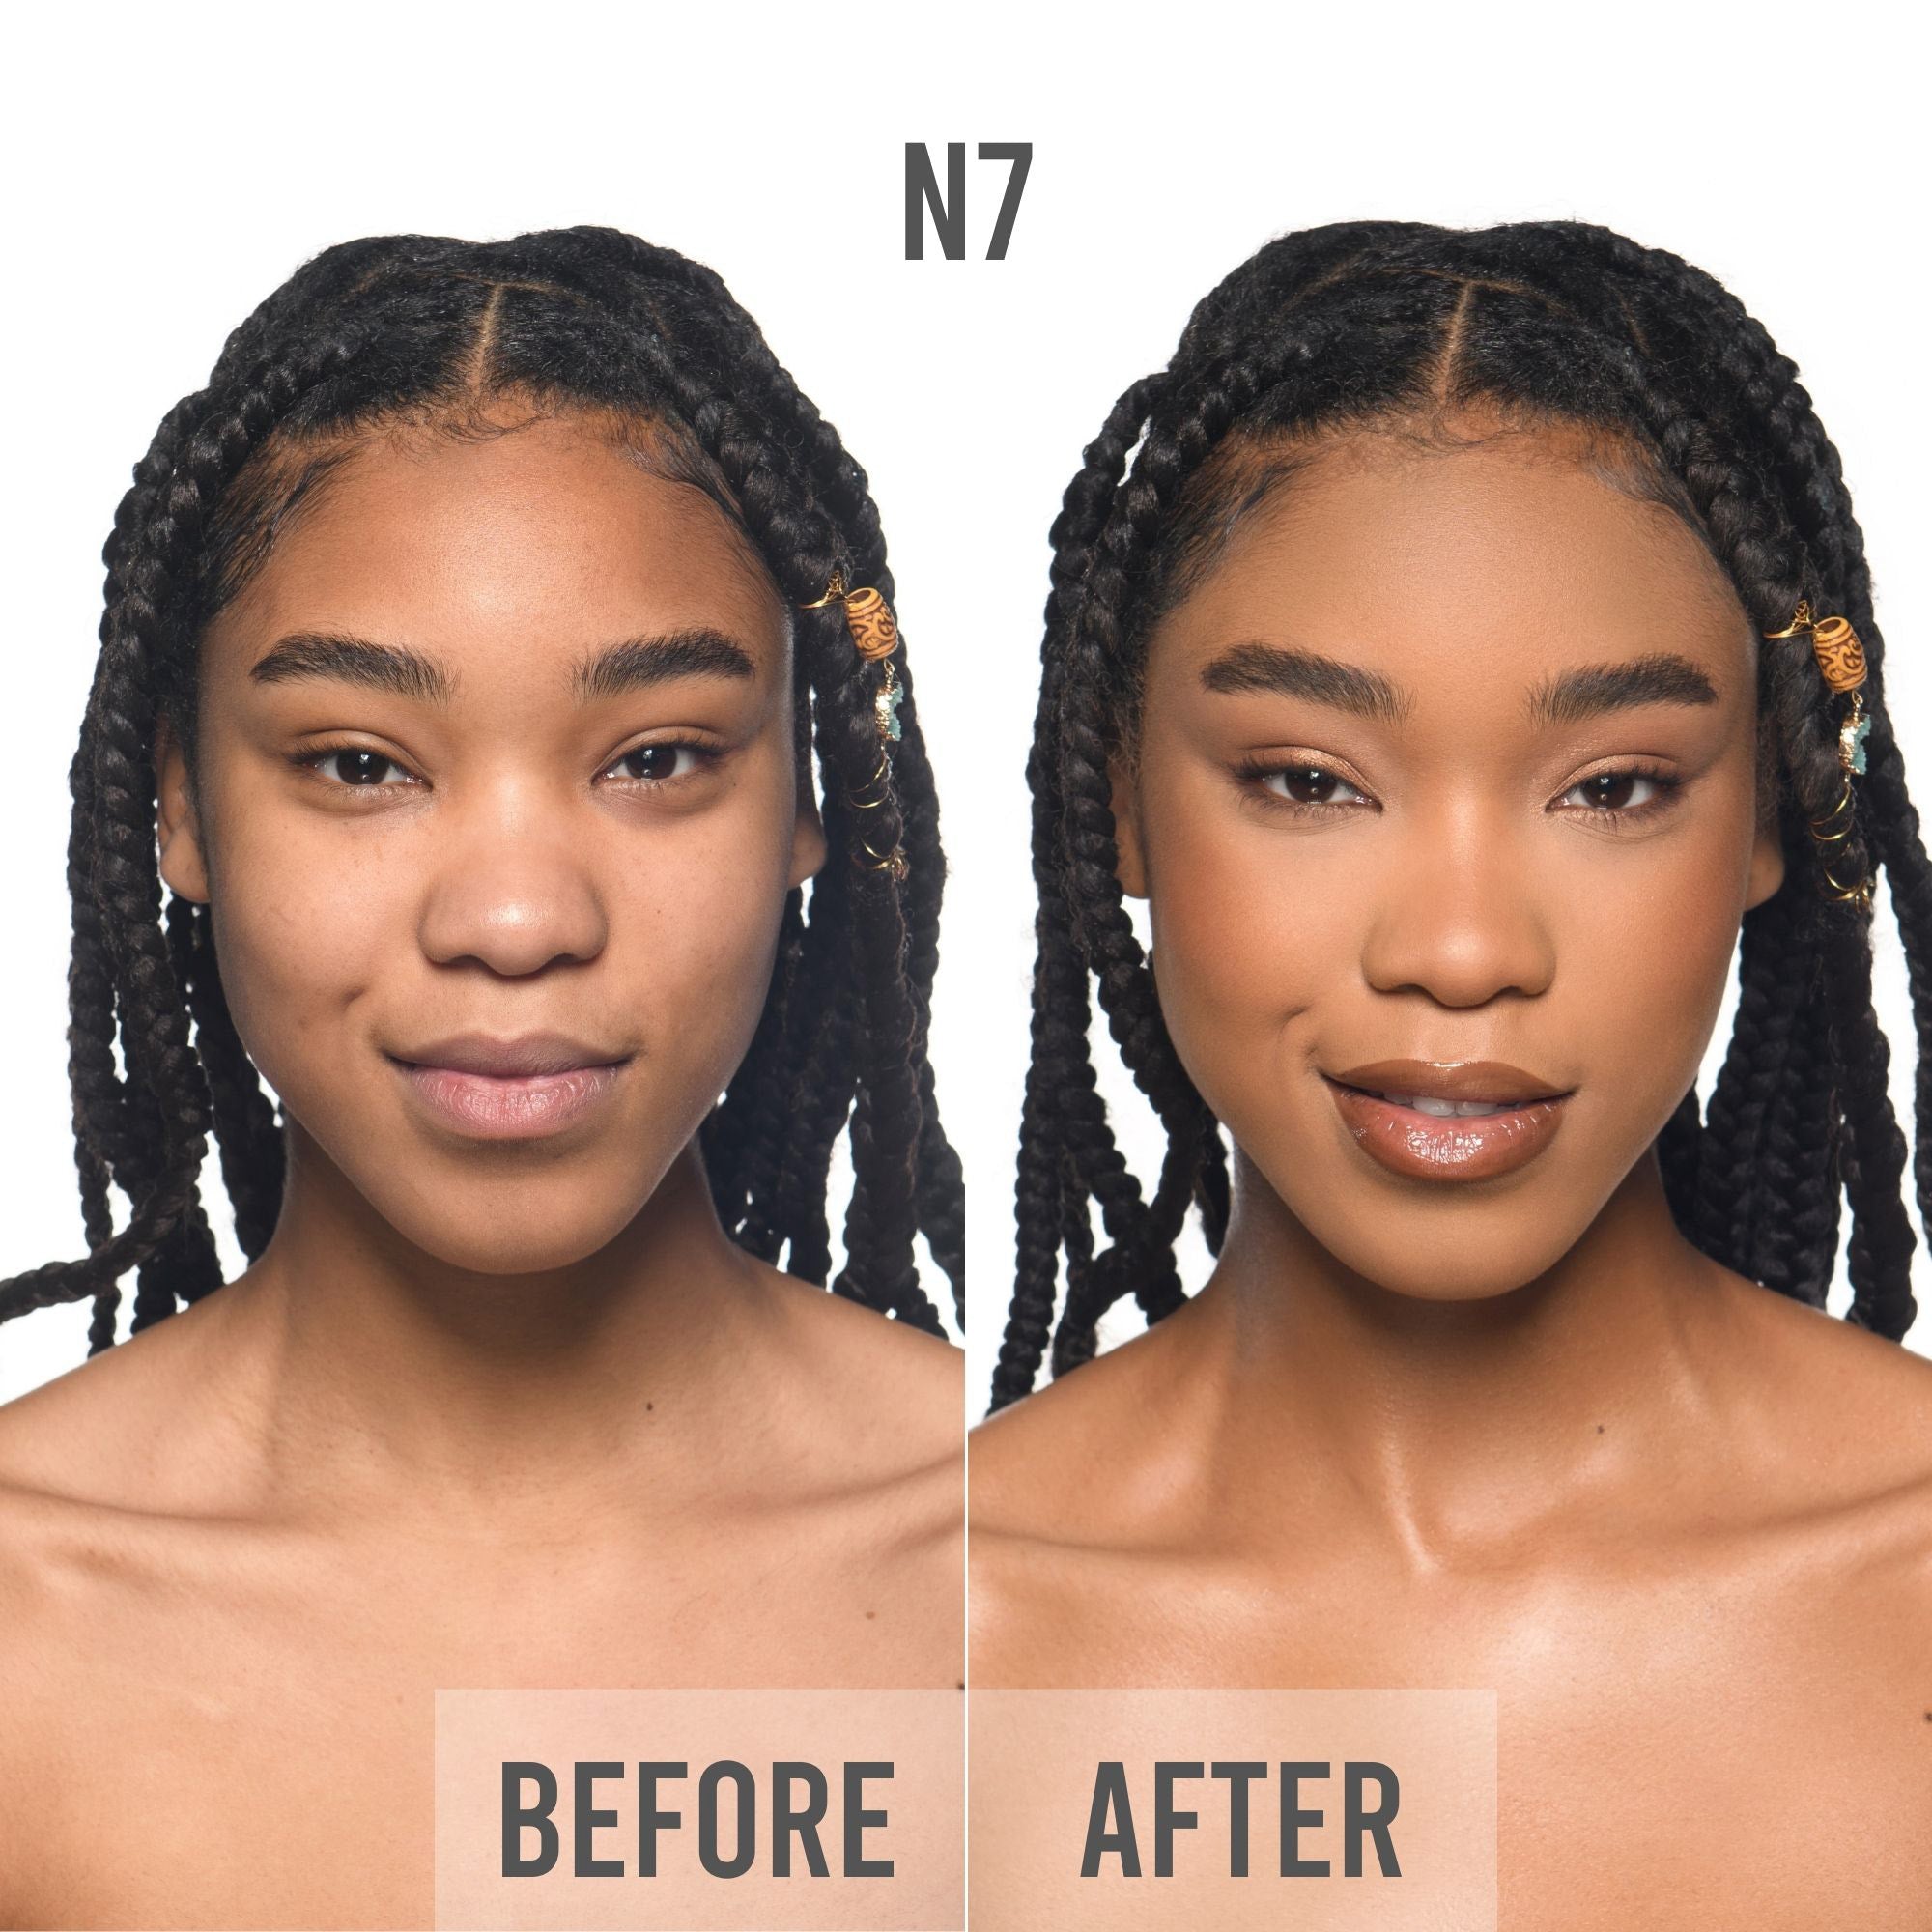 bPerfect CHROMA Cover Matte Foundation, N7 before &amp; after